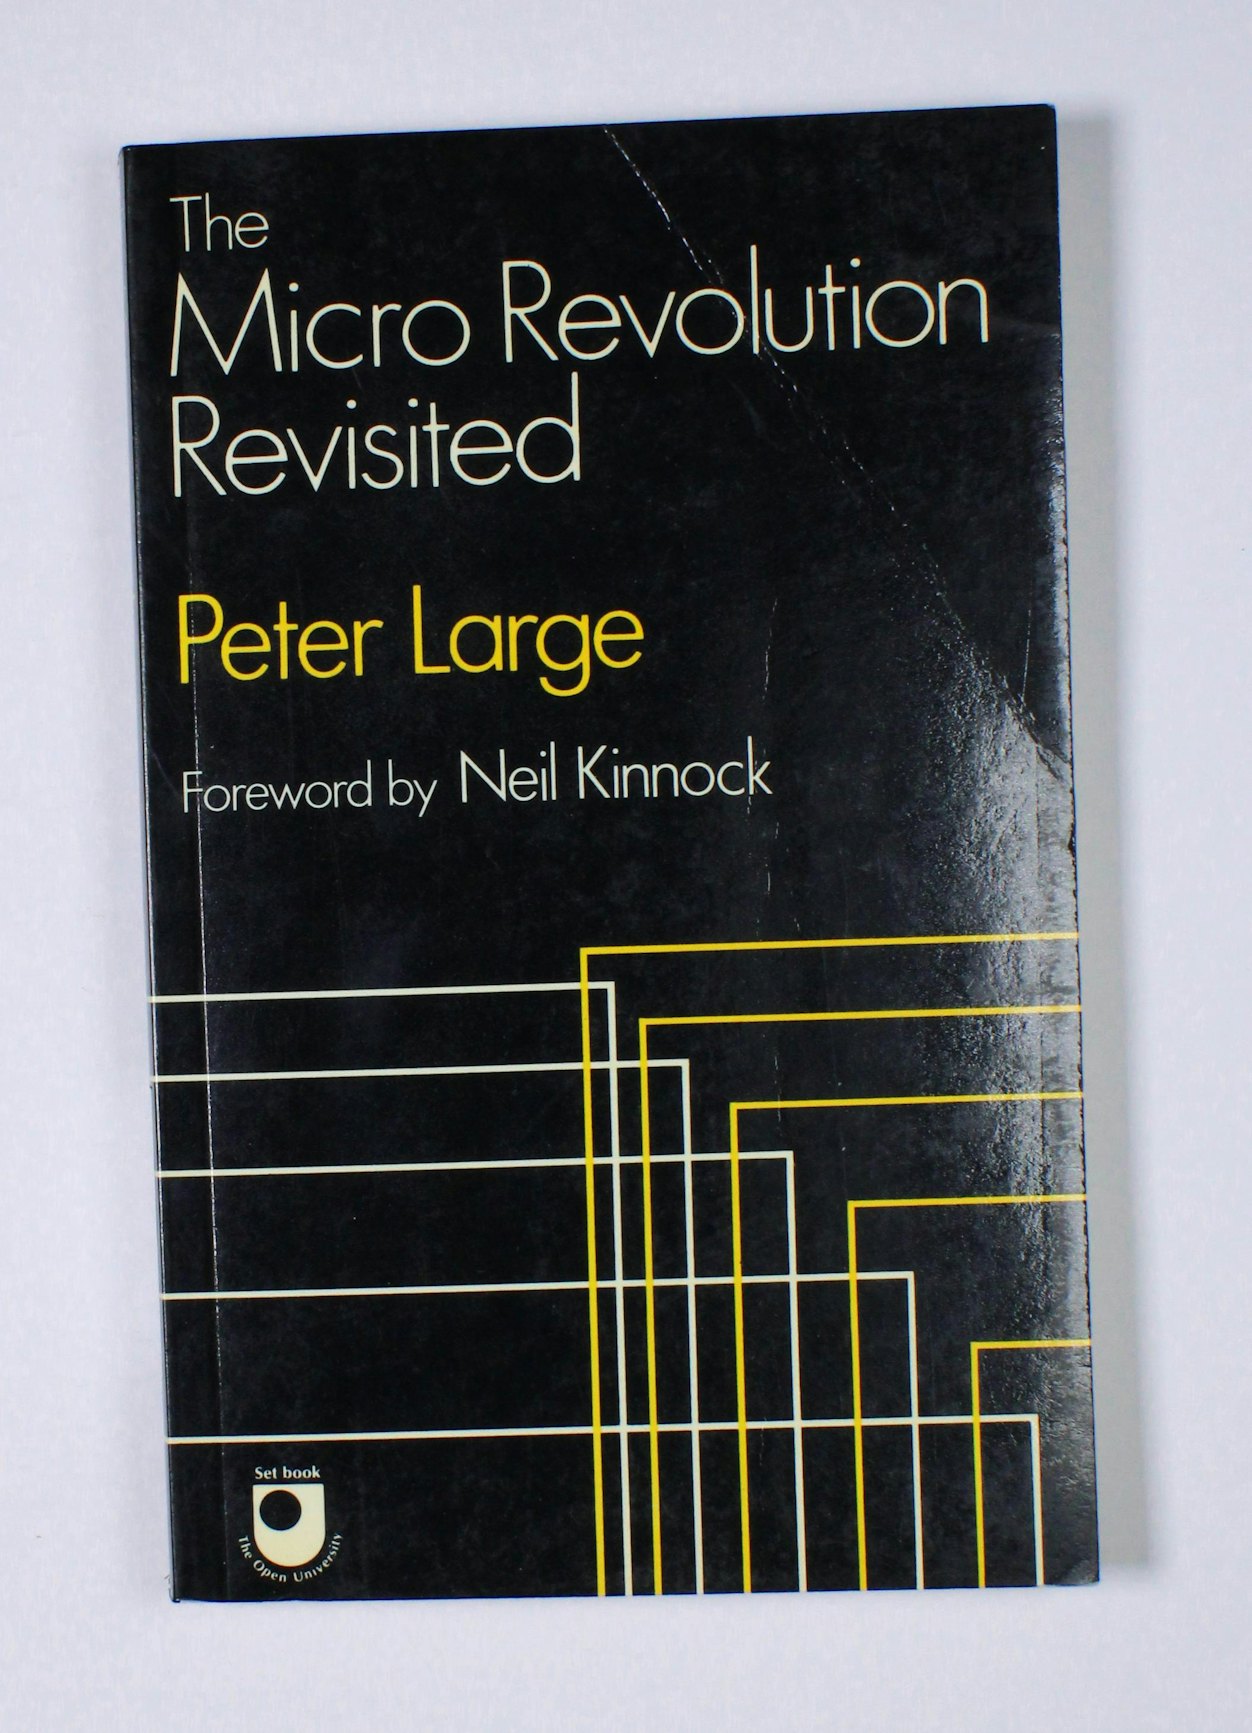 The Micro Revolution Revisited